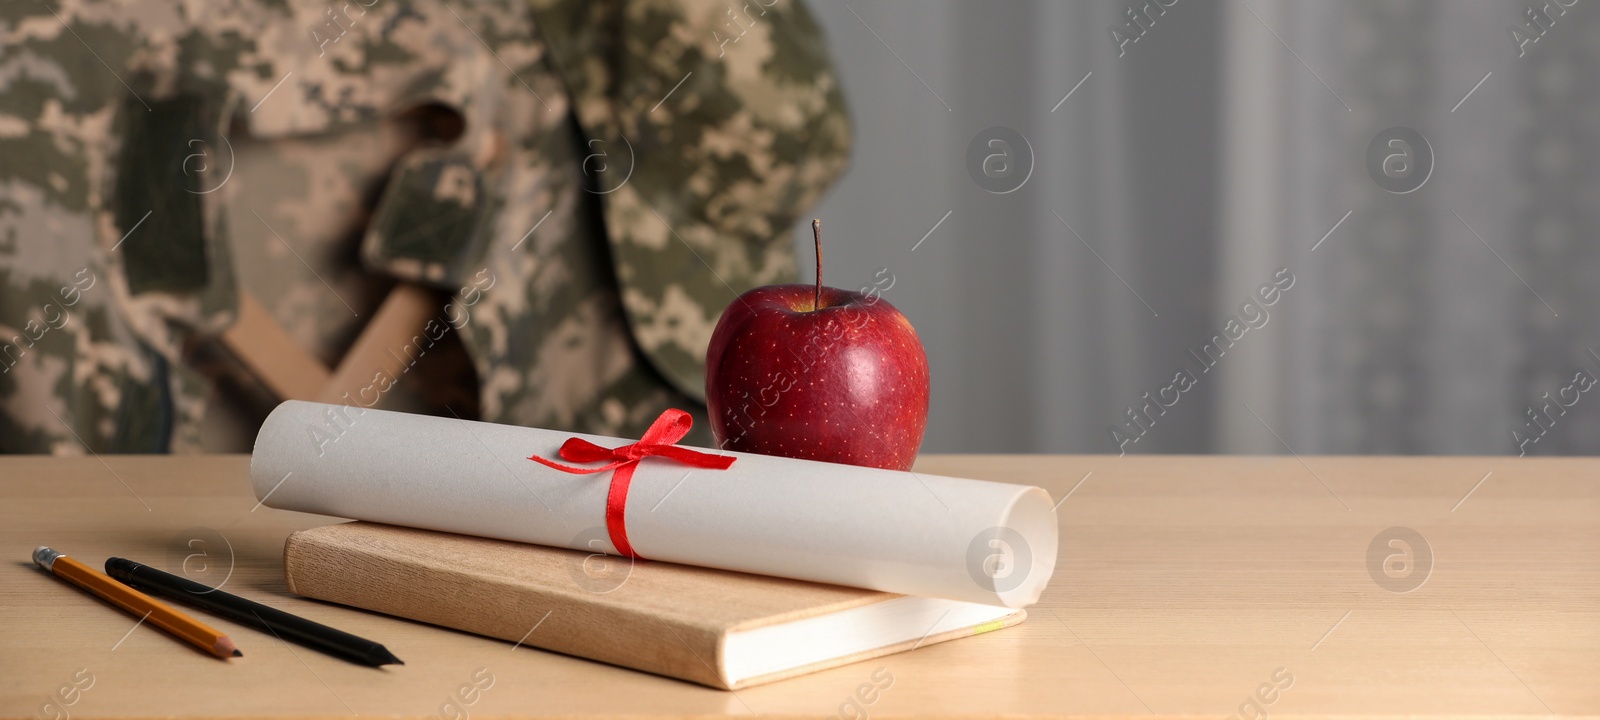 Image of Military education. Diploma, apple and stationery on wooden table, space for text. Chair with soldier's jacket indoors